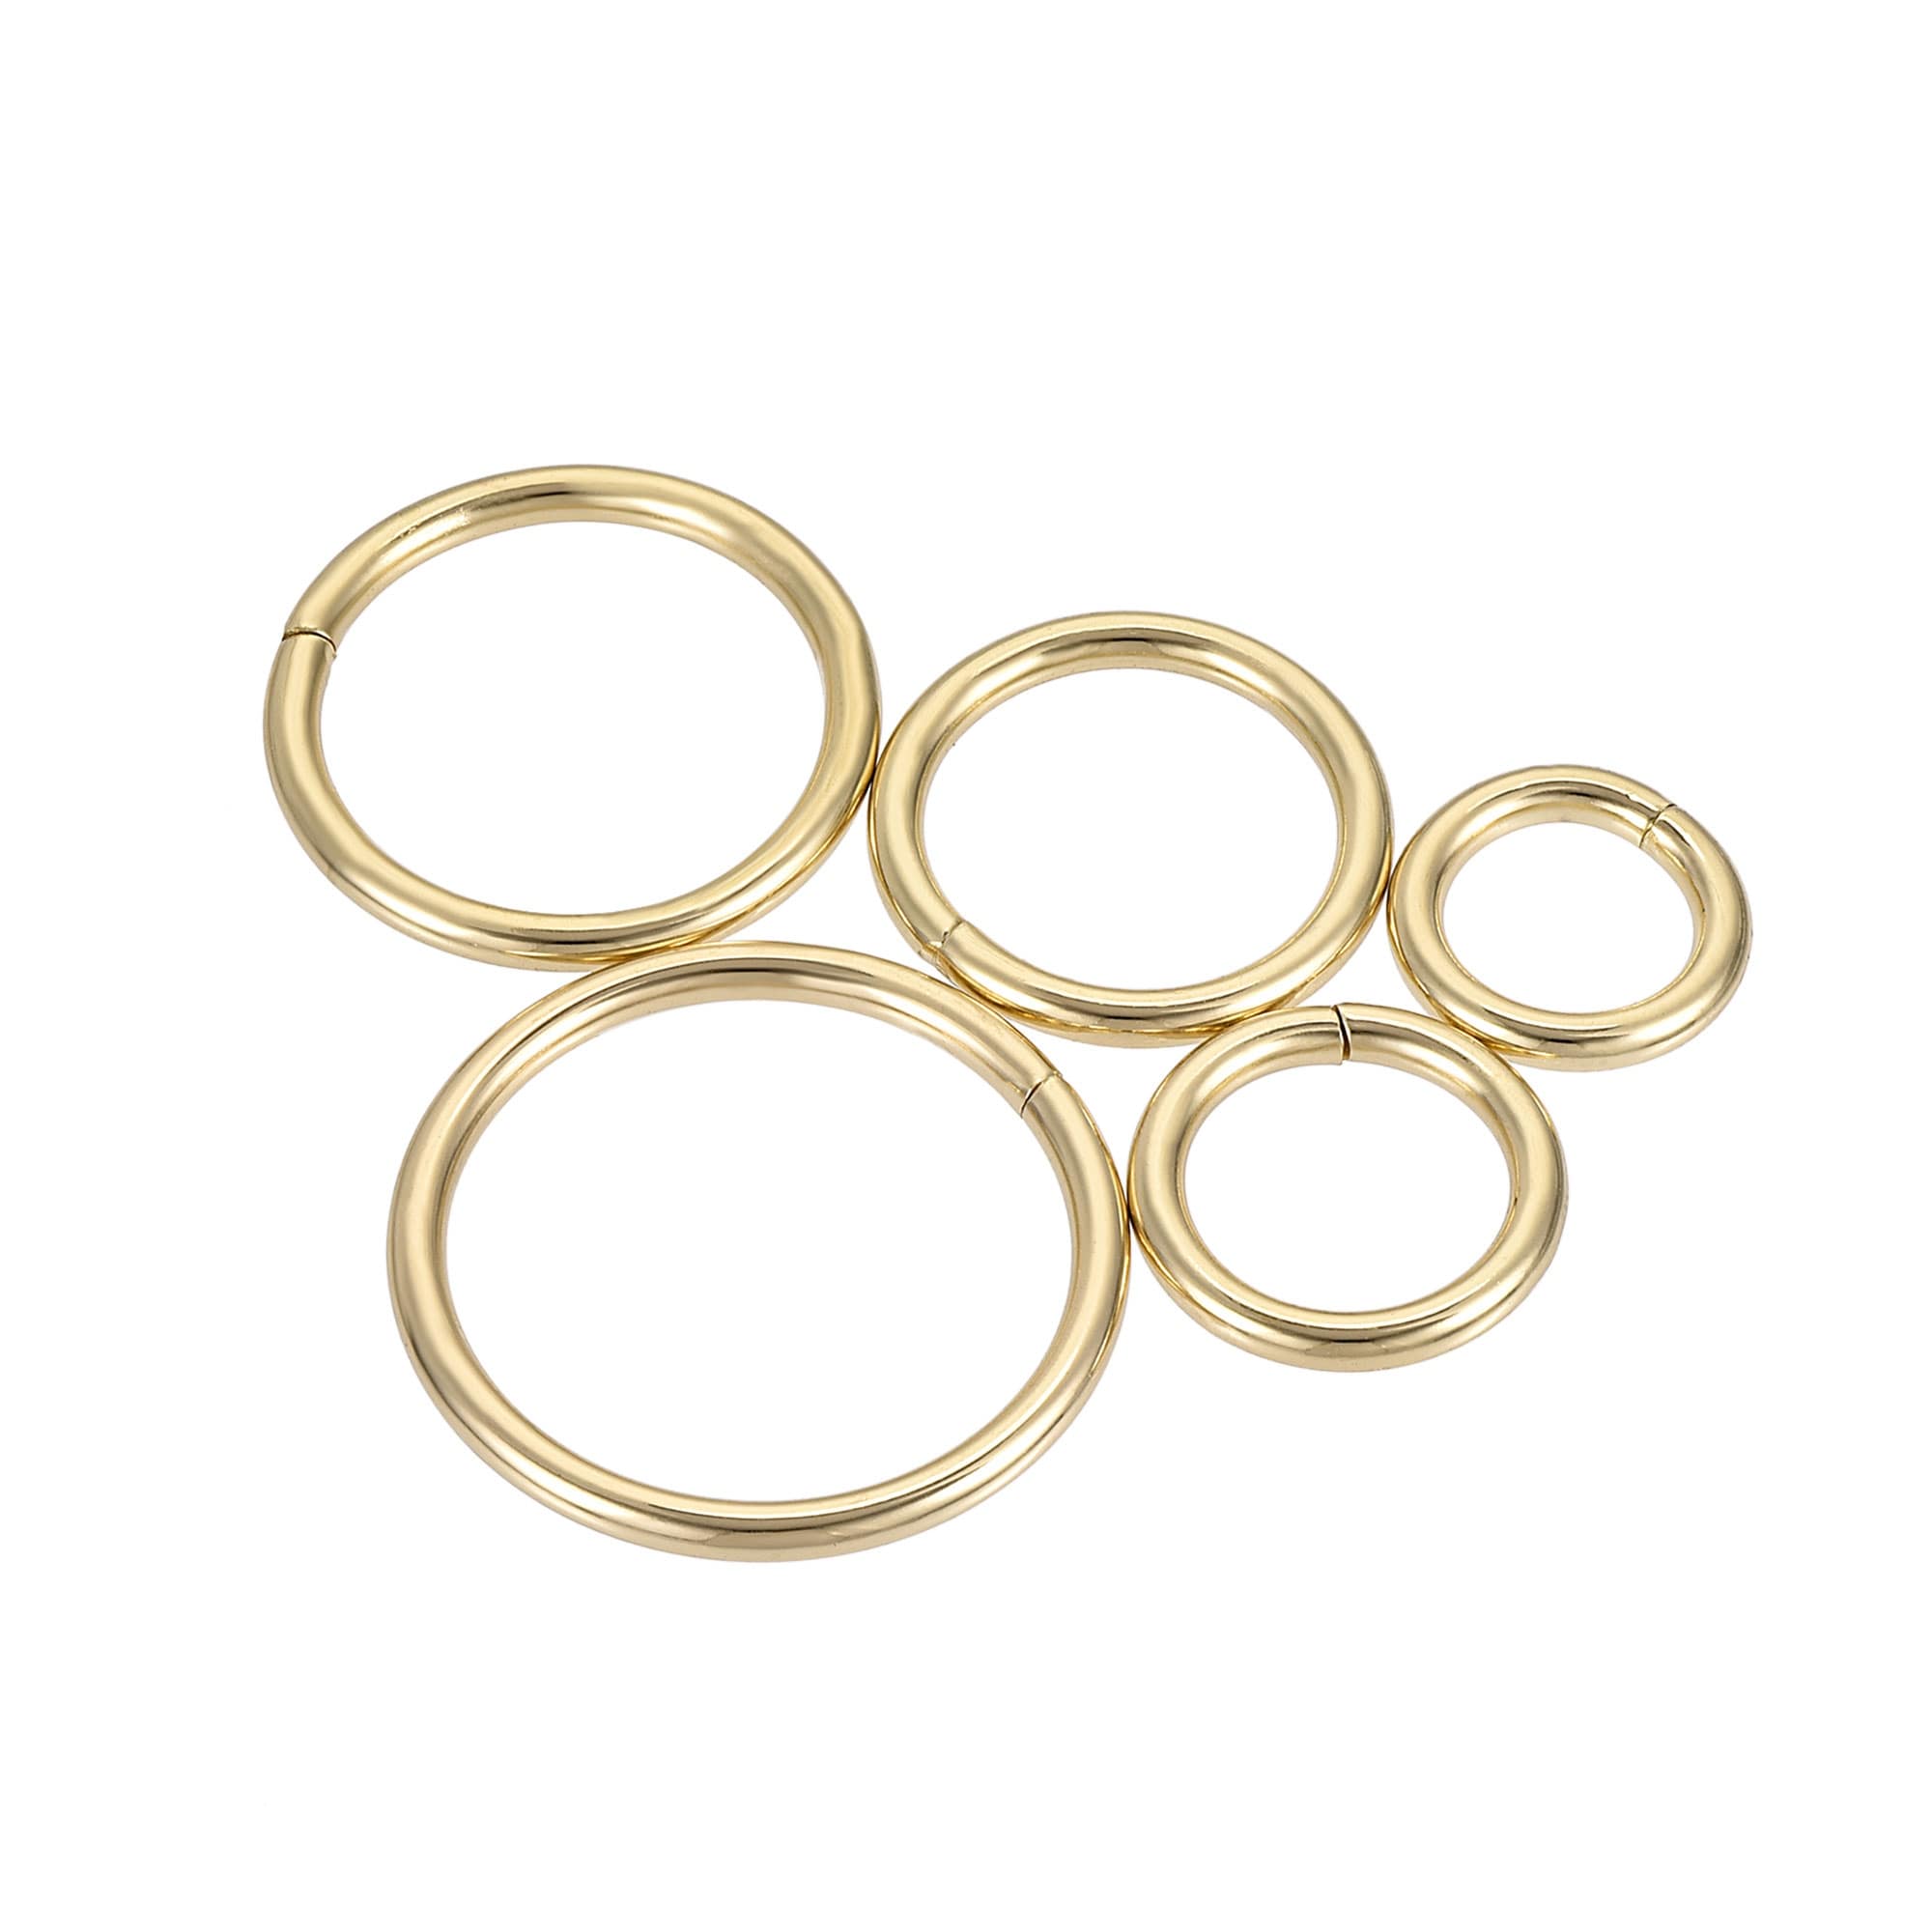 Metal O Rings, 8 Pack 25mm(0.98) ID 3.8mm Thick Non-Welded O-Rings, Silver  Tone 